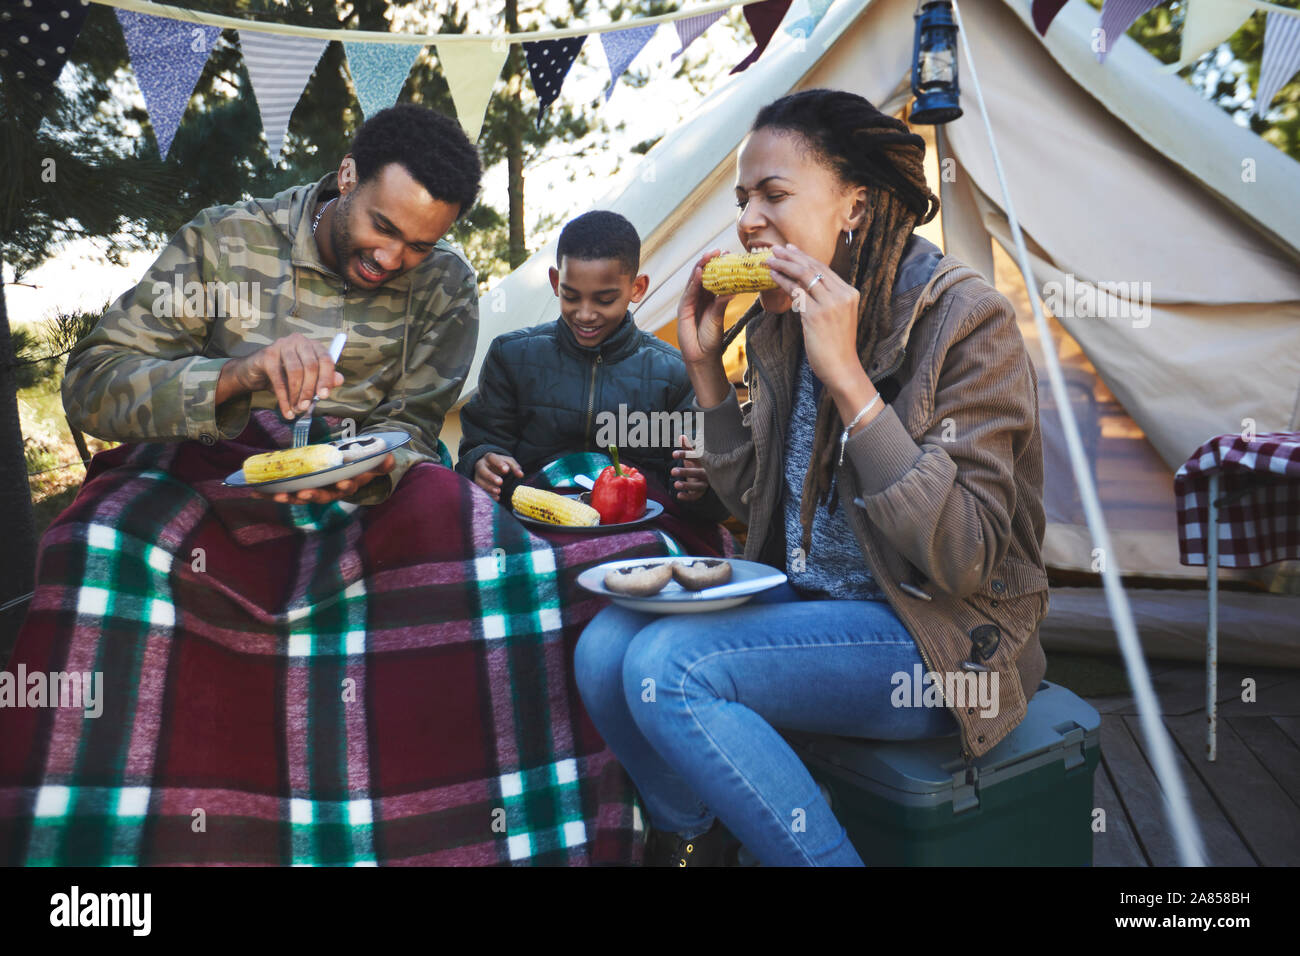 Family eating corn on the cob at campsite Stock Photo